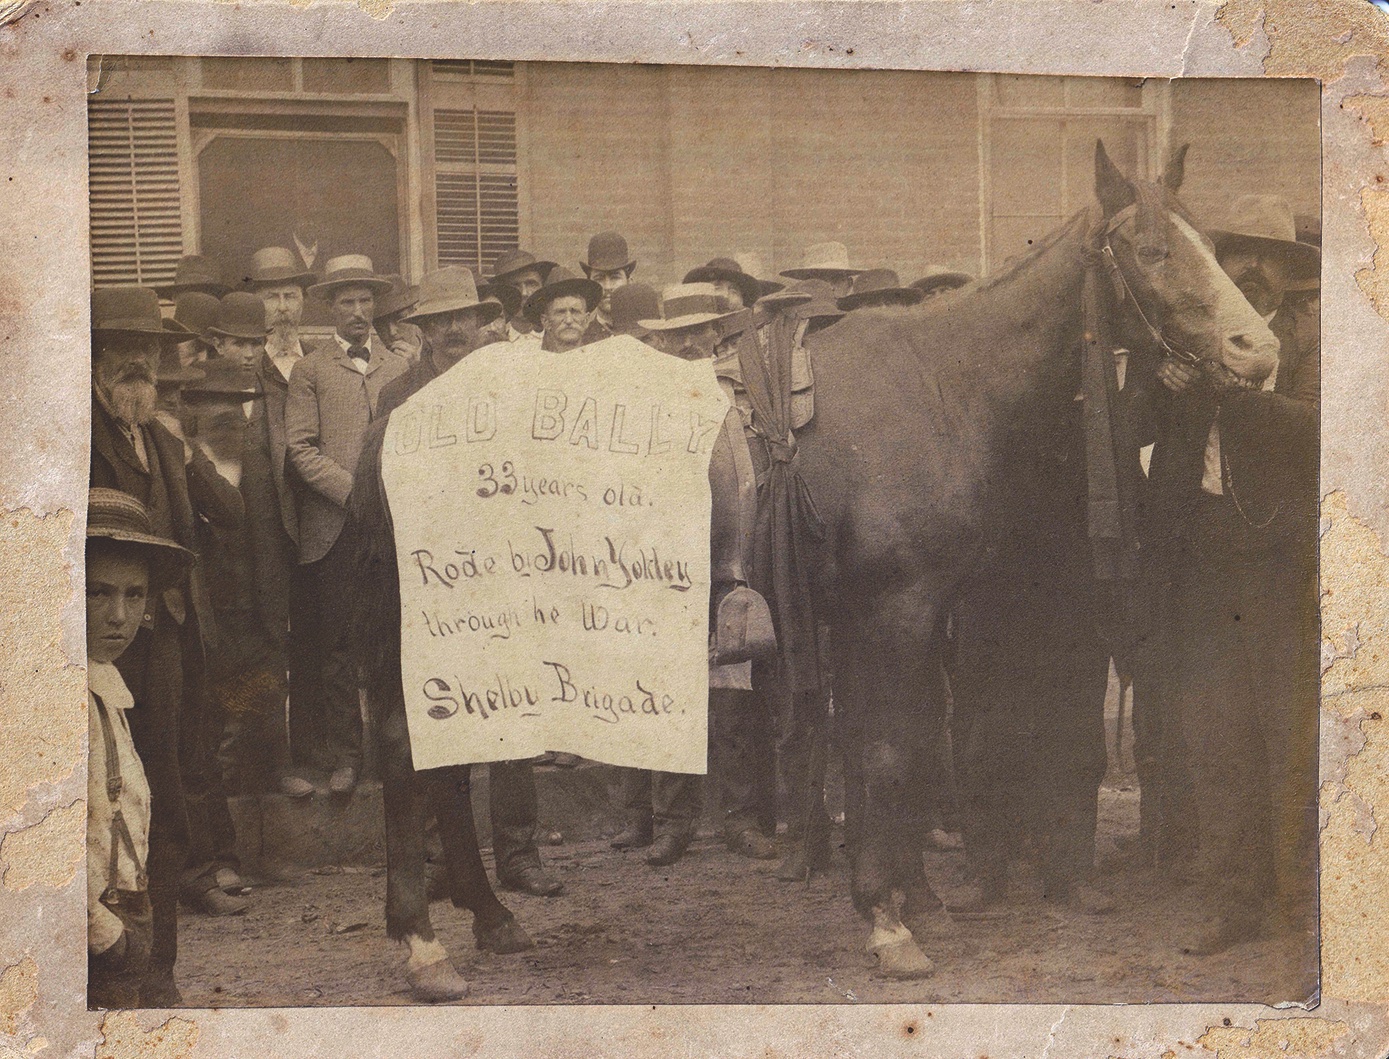 A veteran of Trans-Mississippi Theater fighting, Old Bally was ridden by John Yokley of Jo Shelby’s Cavalry Brigade and found with several bullets in his body when he died. (Audrain County Historical Society)